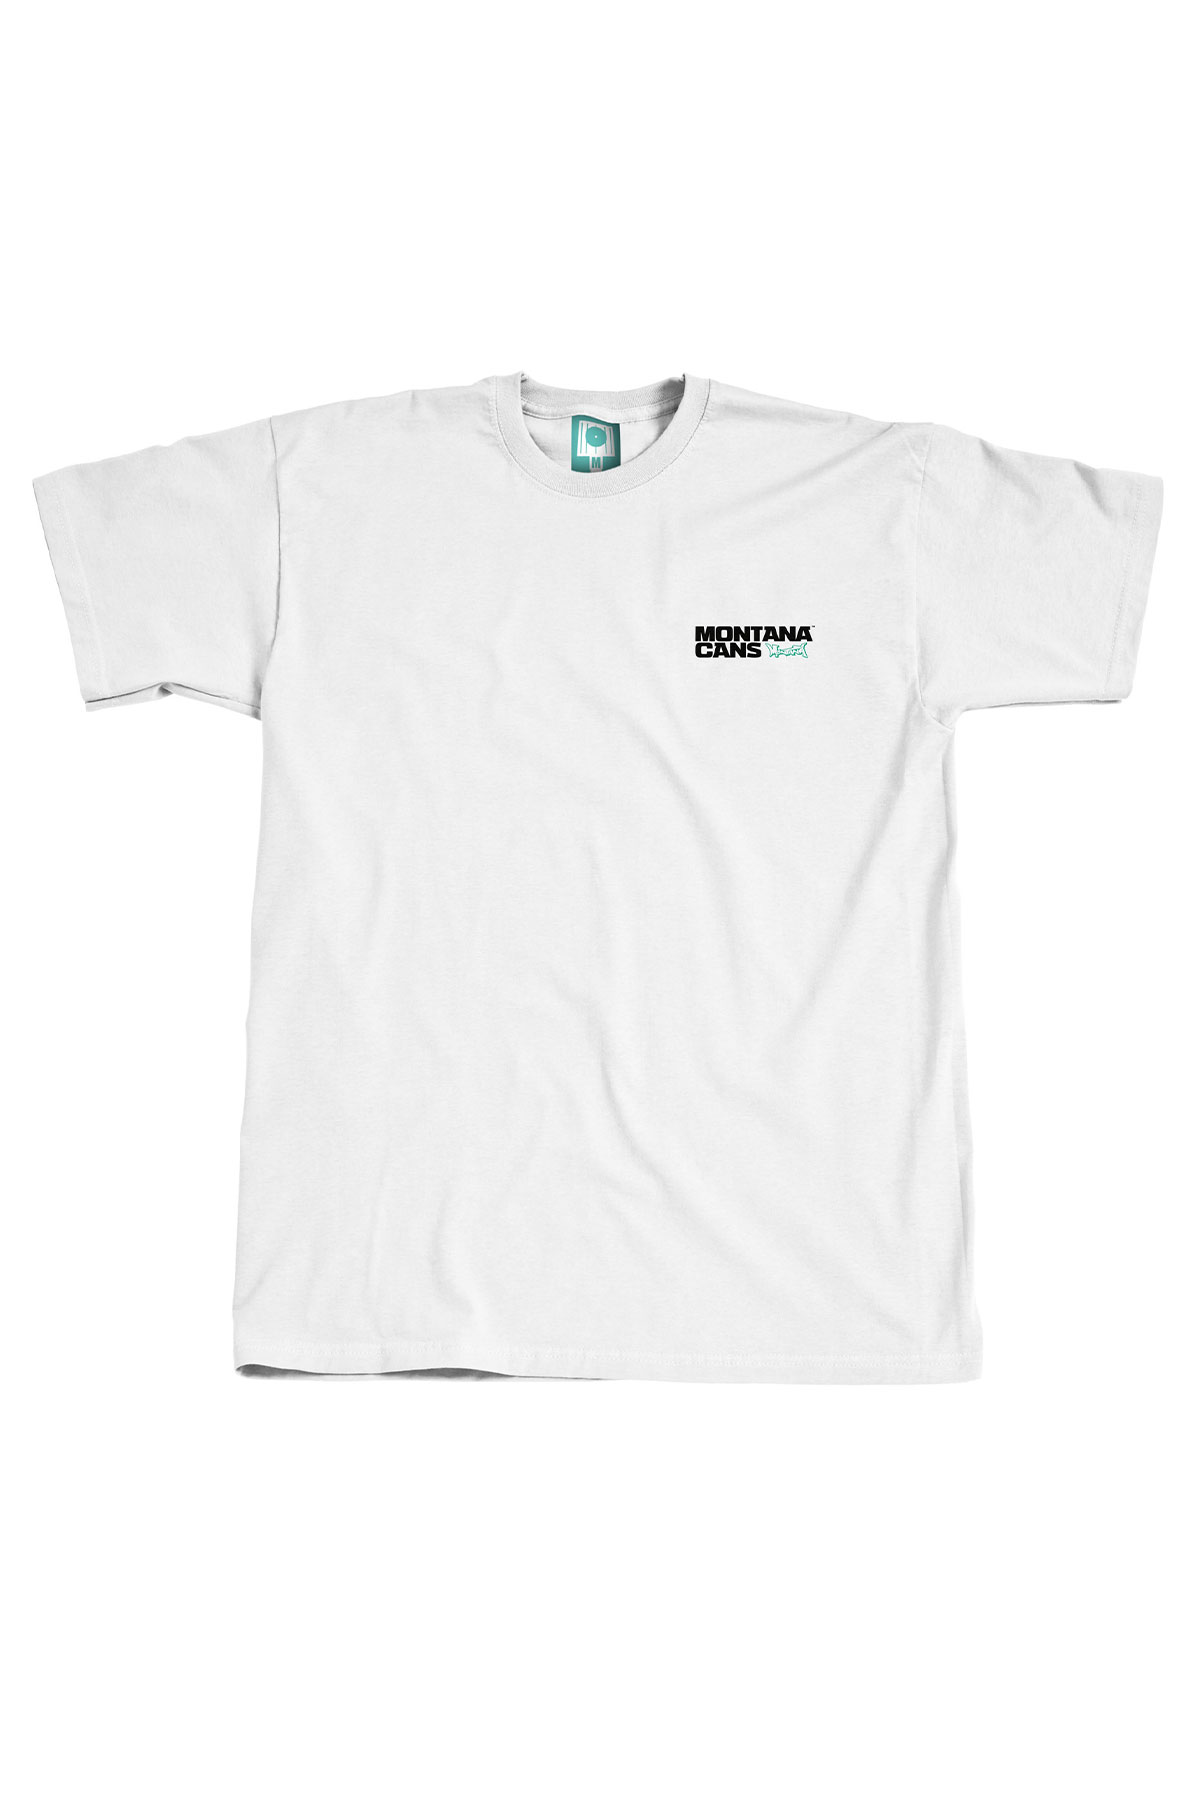 Montana LEAVE NO TRACE White T-Shirt by Matter Of